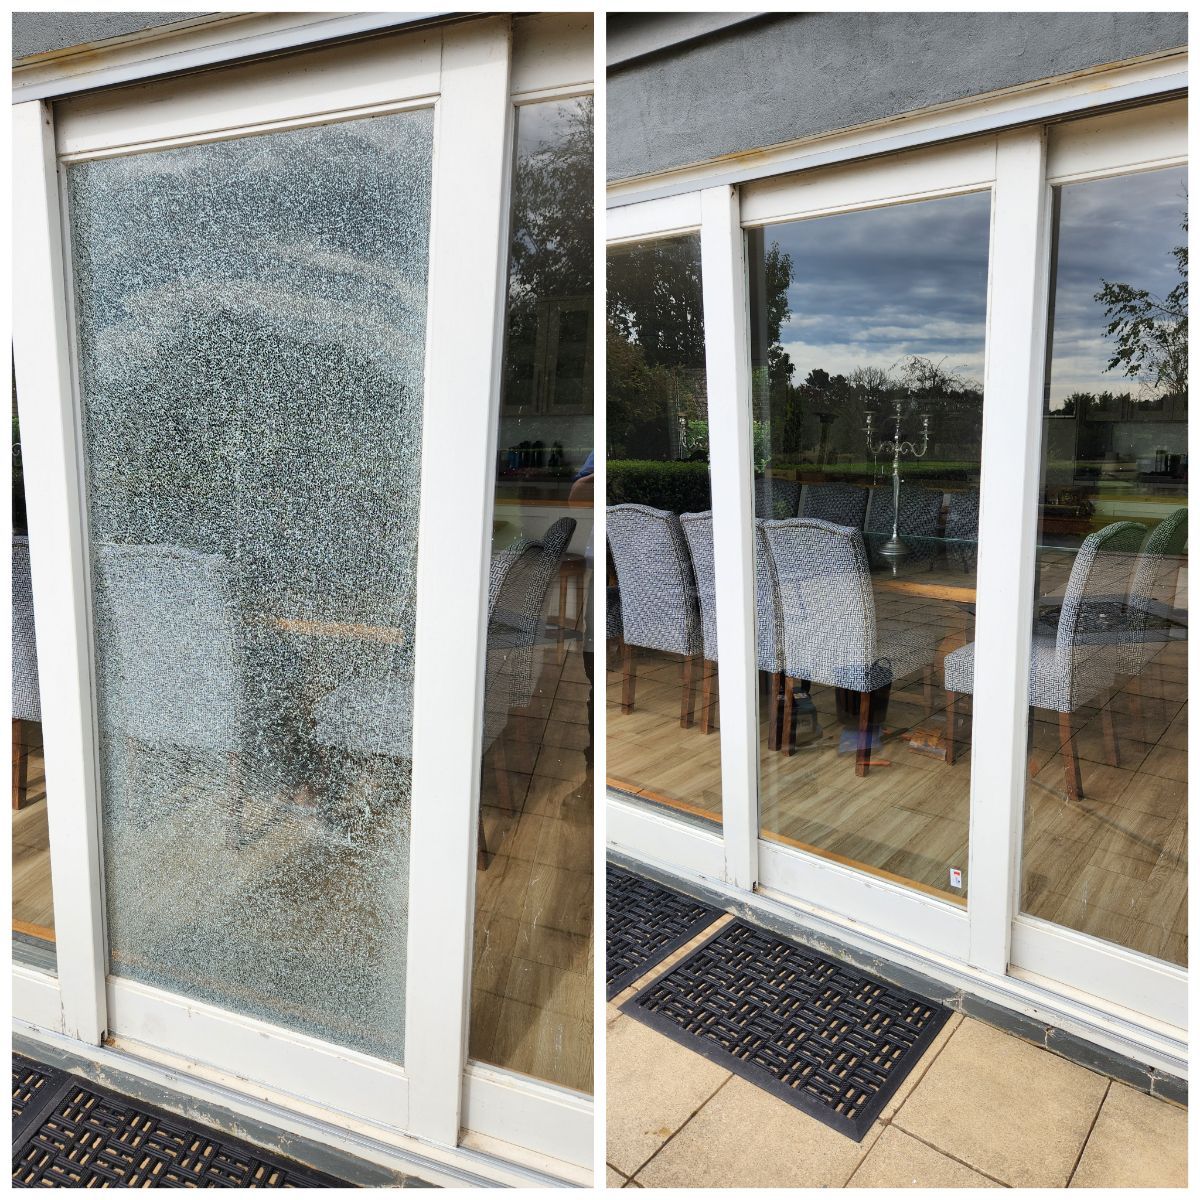 Sliding Door Glass Repair - Glazier in the Southern Highlands